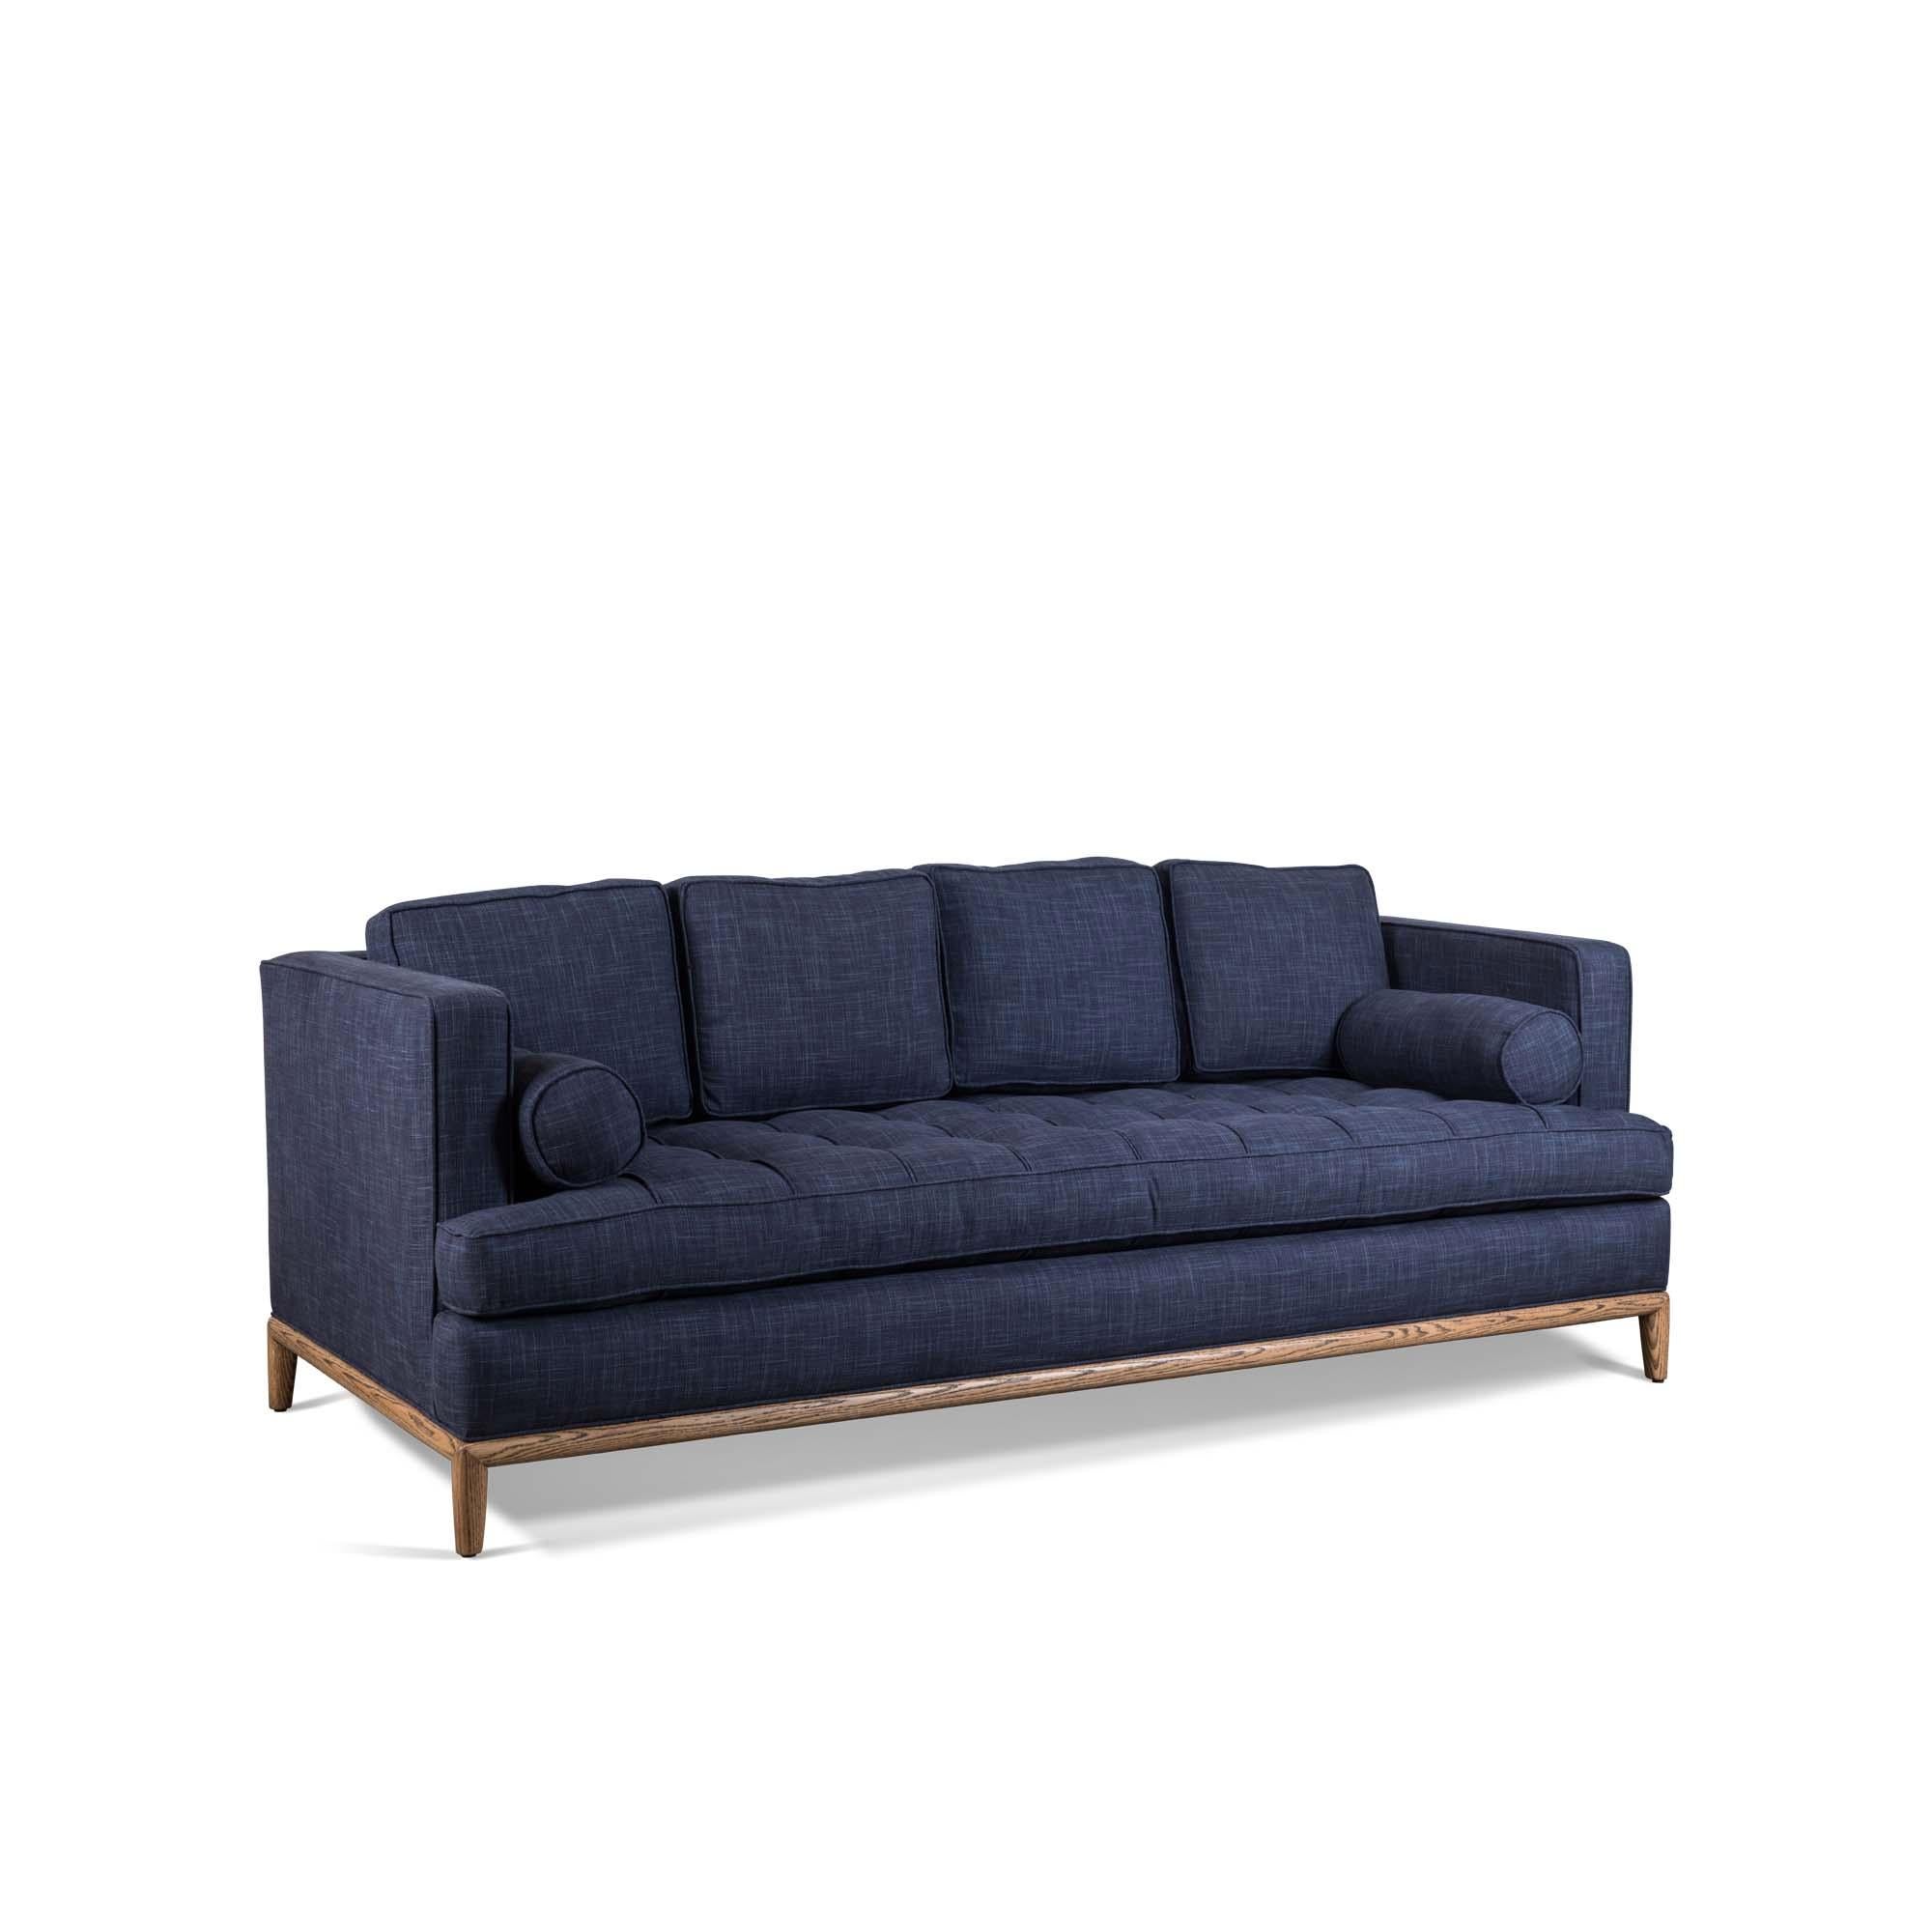 The Montebello Sofa is a tuxedo-style sofa with a button-tufted seat and wooden base. Comes with either 3 or 4 down-wrapped cushions and 2 bolster pillows.

The Lawson-Fenning Collection is designed and handmade in Los Angeles, California.
Reach